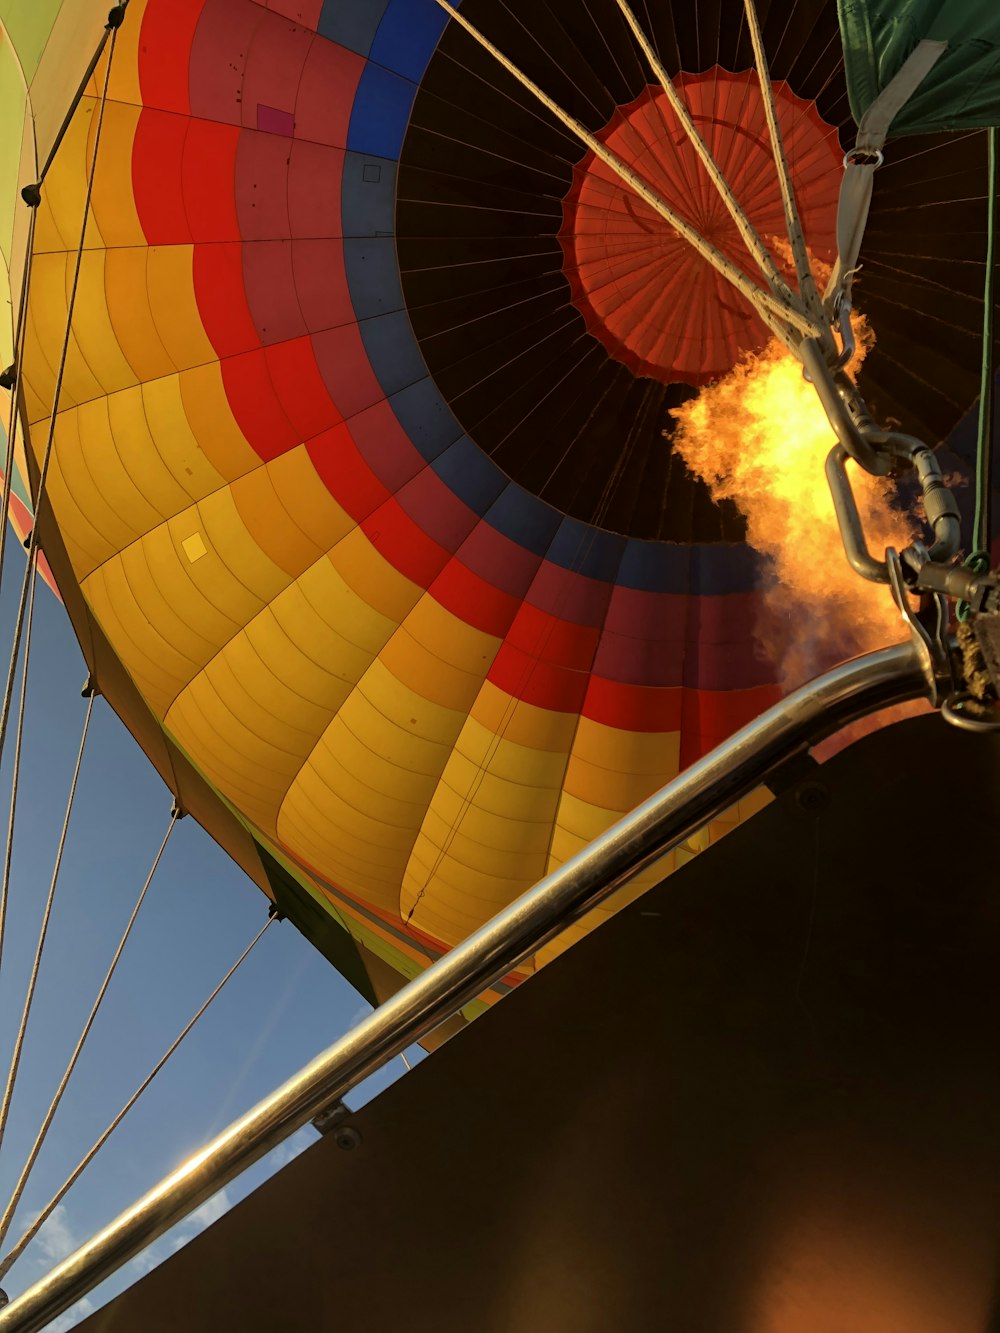 a large colorful hot air balloon being inflated